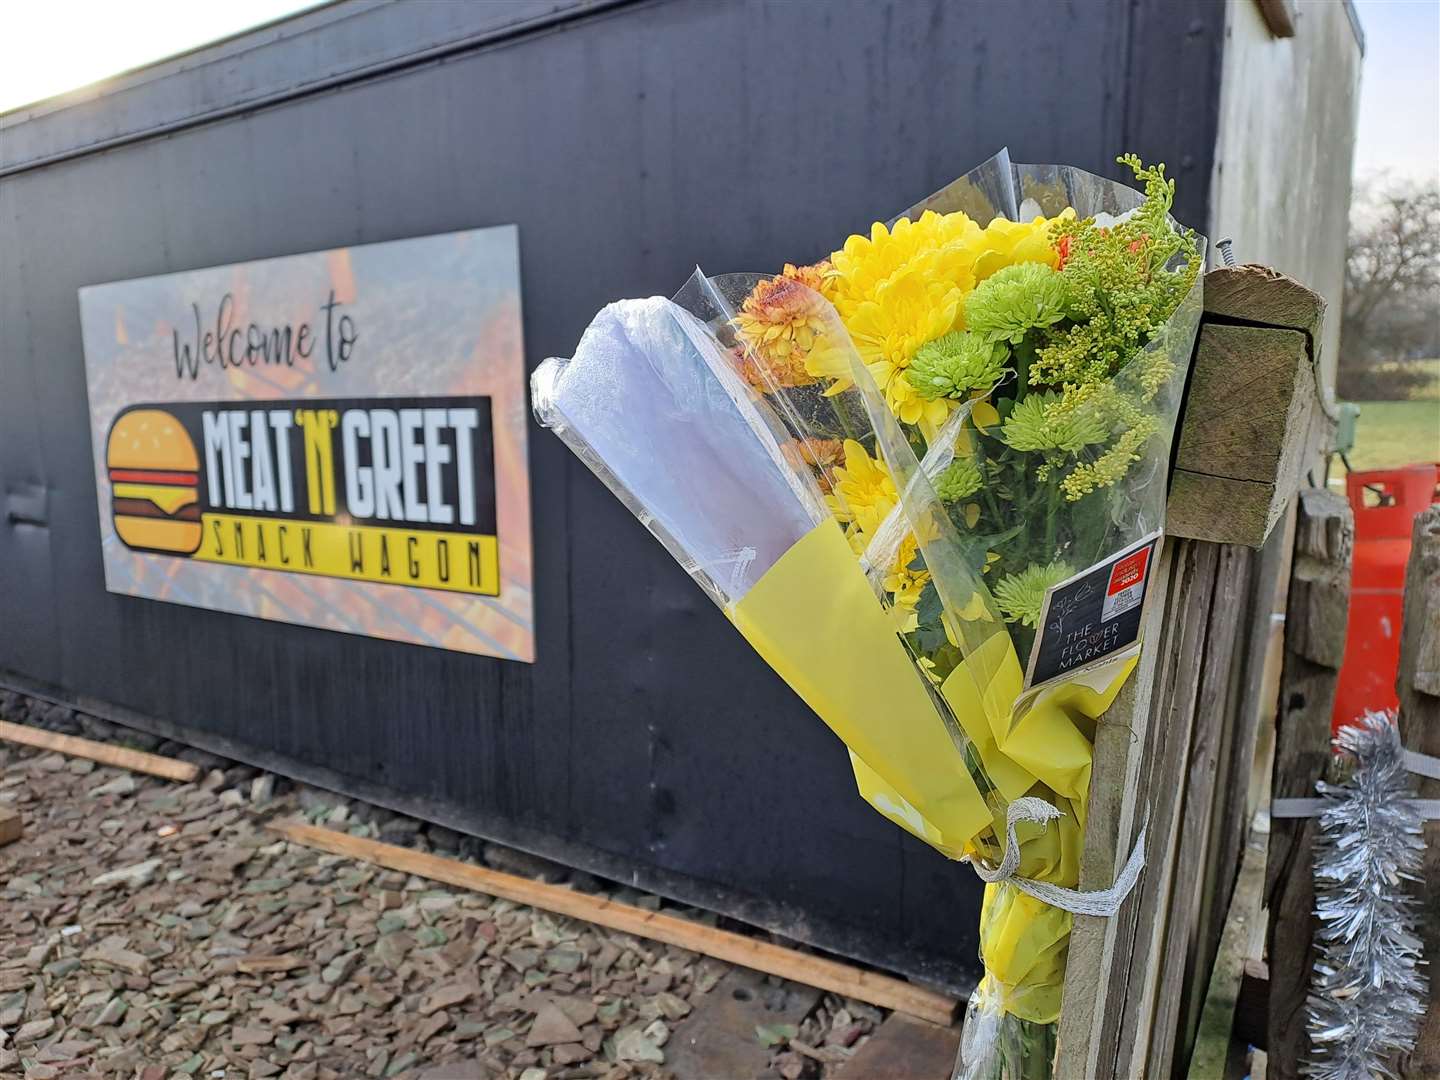 Flowers were left at the Meat 'n' Greet burger hut which Tyla says he will have to removed because of the tragic memories